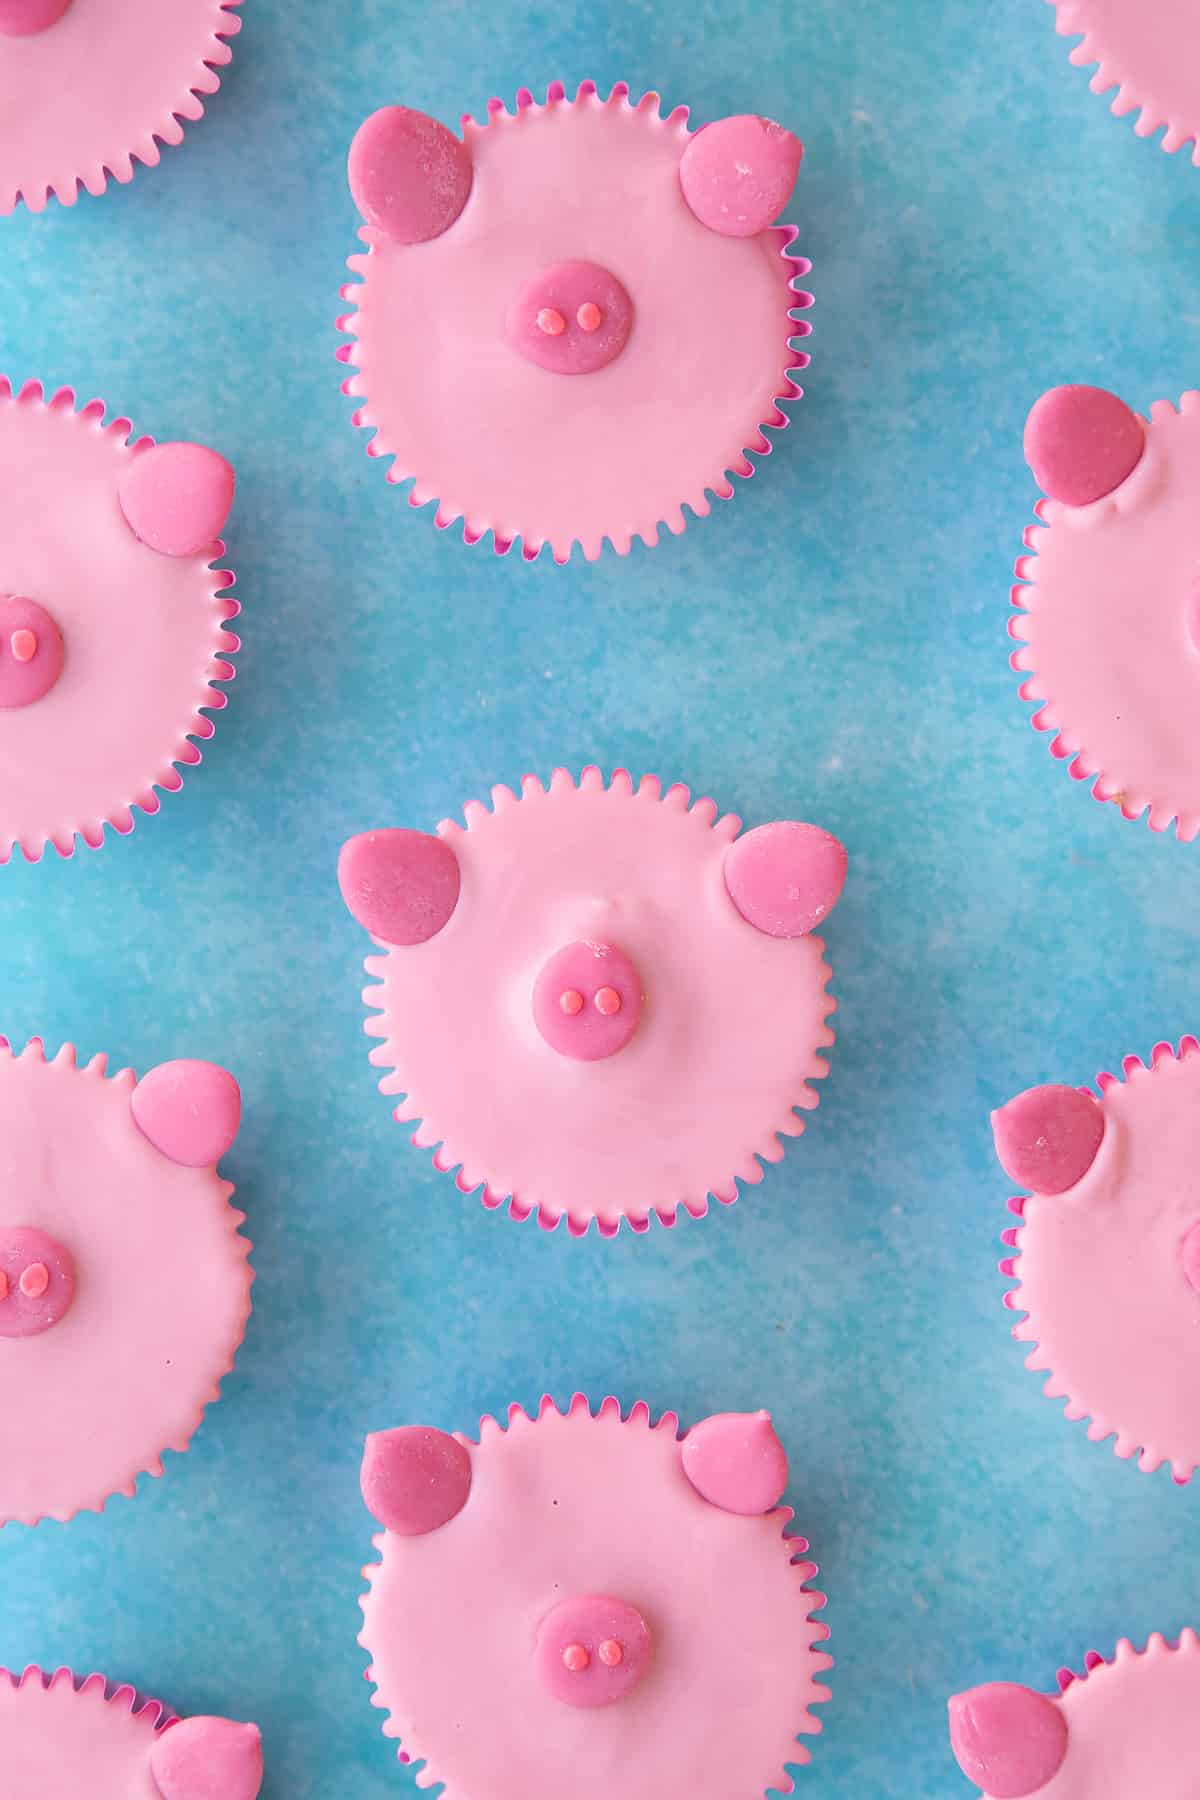 pink icing topped cupcakes with pink chocolate ears and nose.